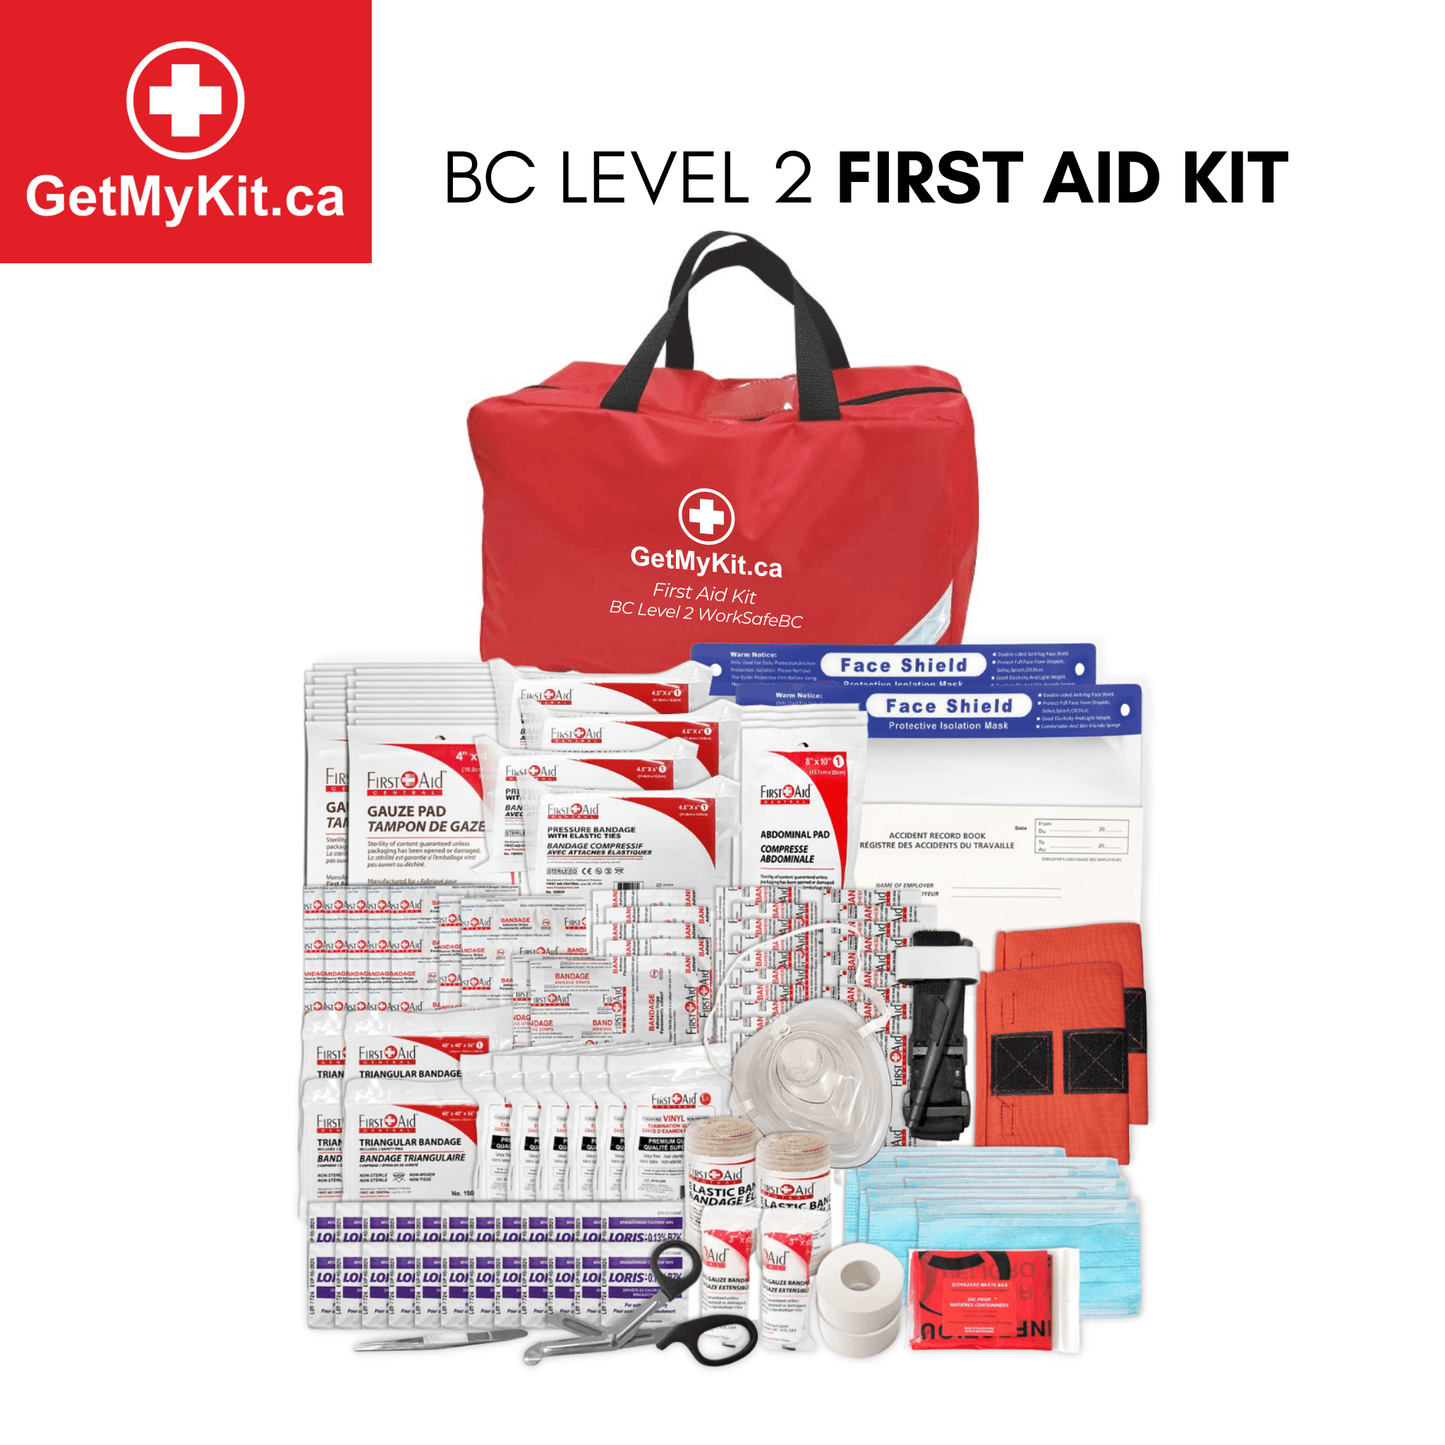 BC Level 2 First Aid Kit